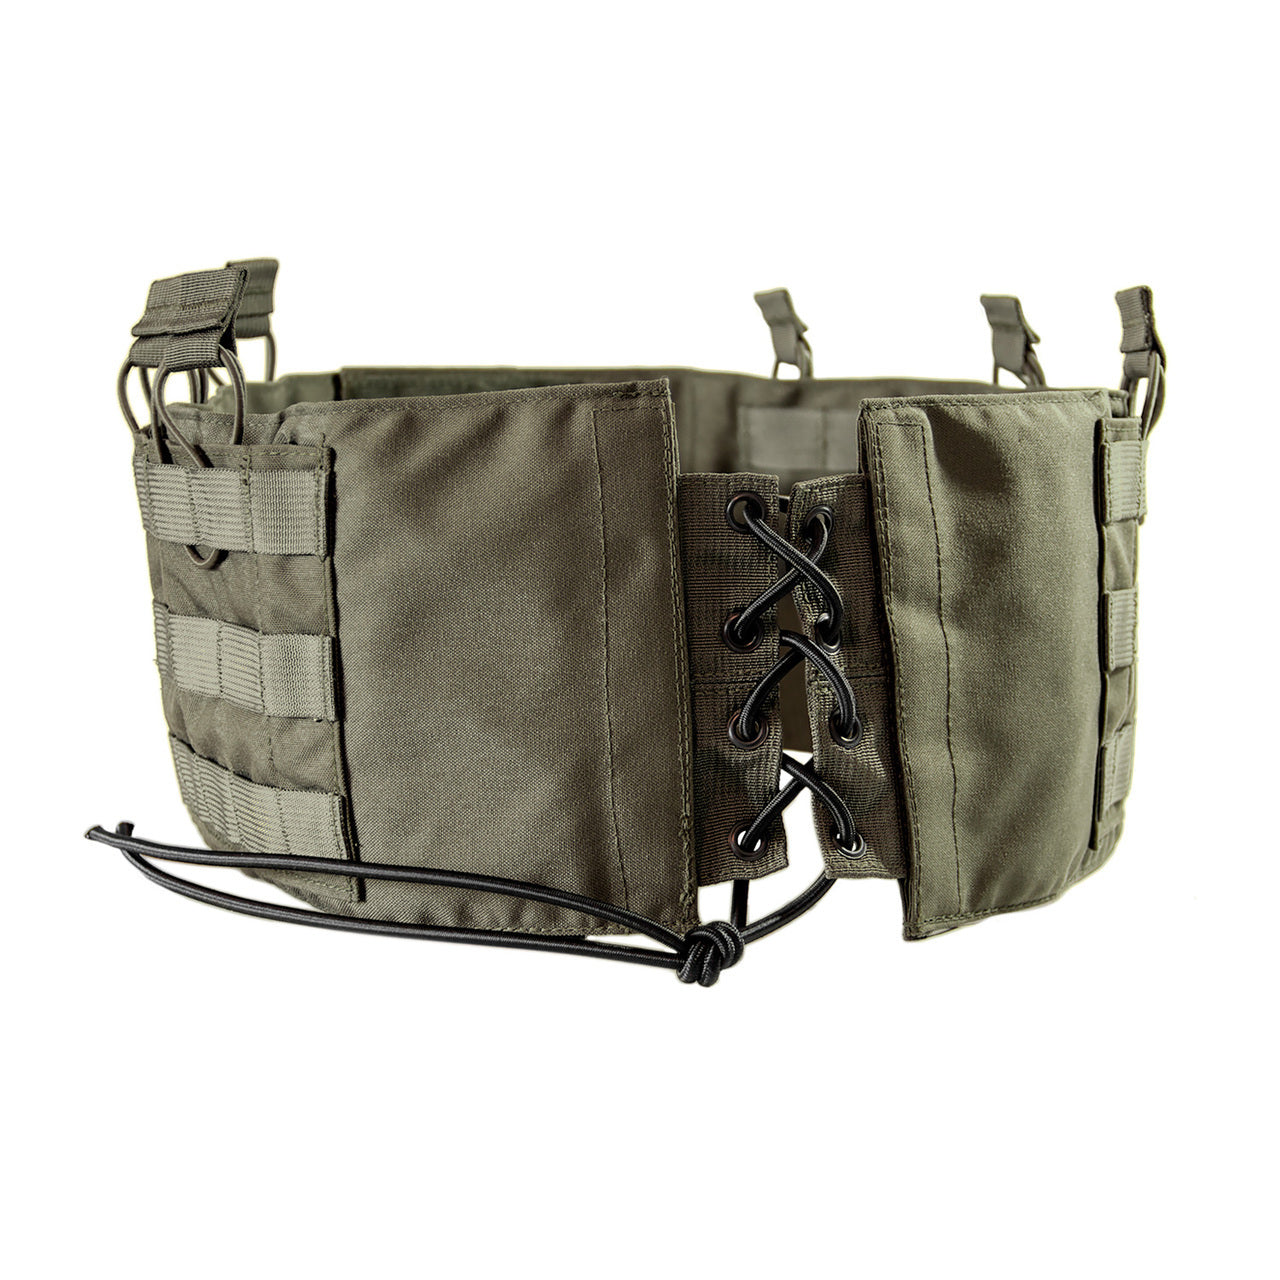 A Shellback Tactical Banshee Elite Cummerbund with two straps and a buckle.